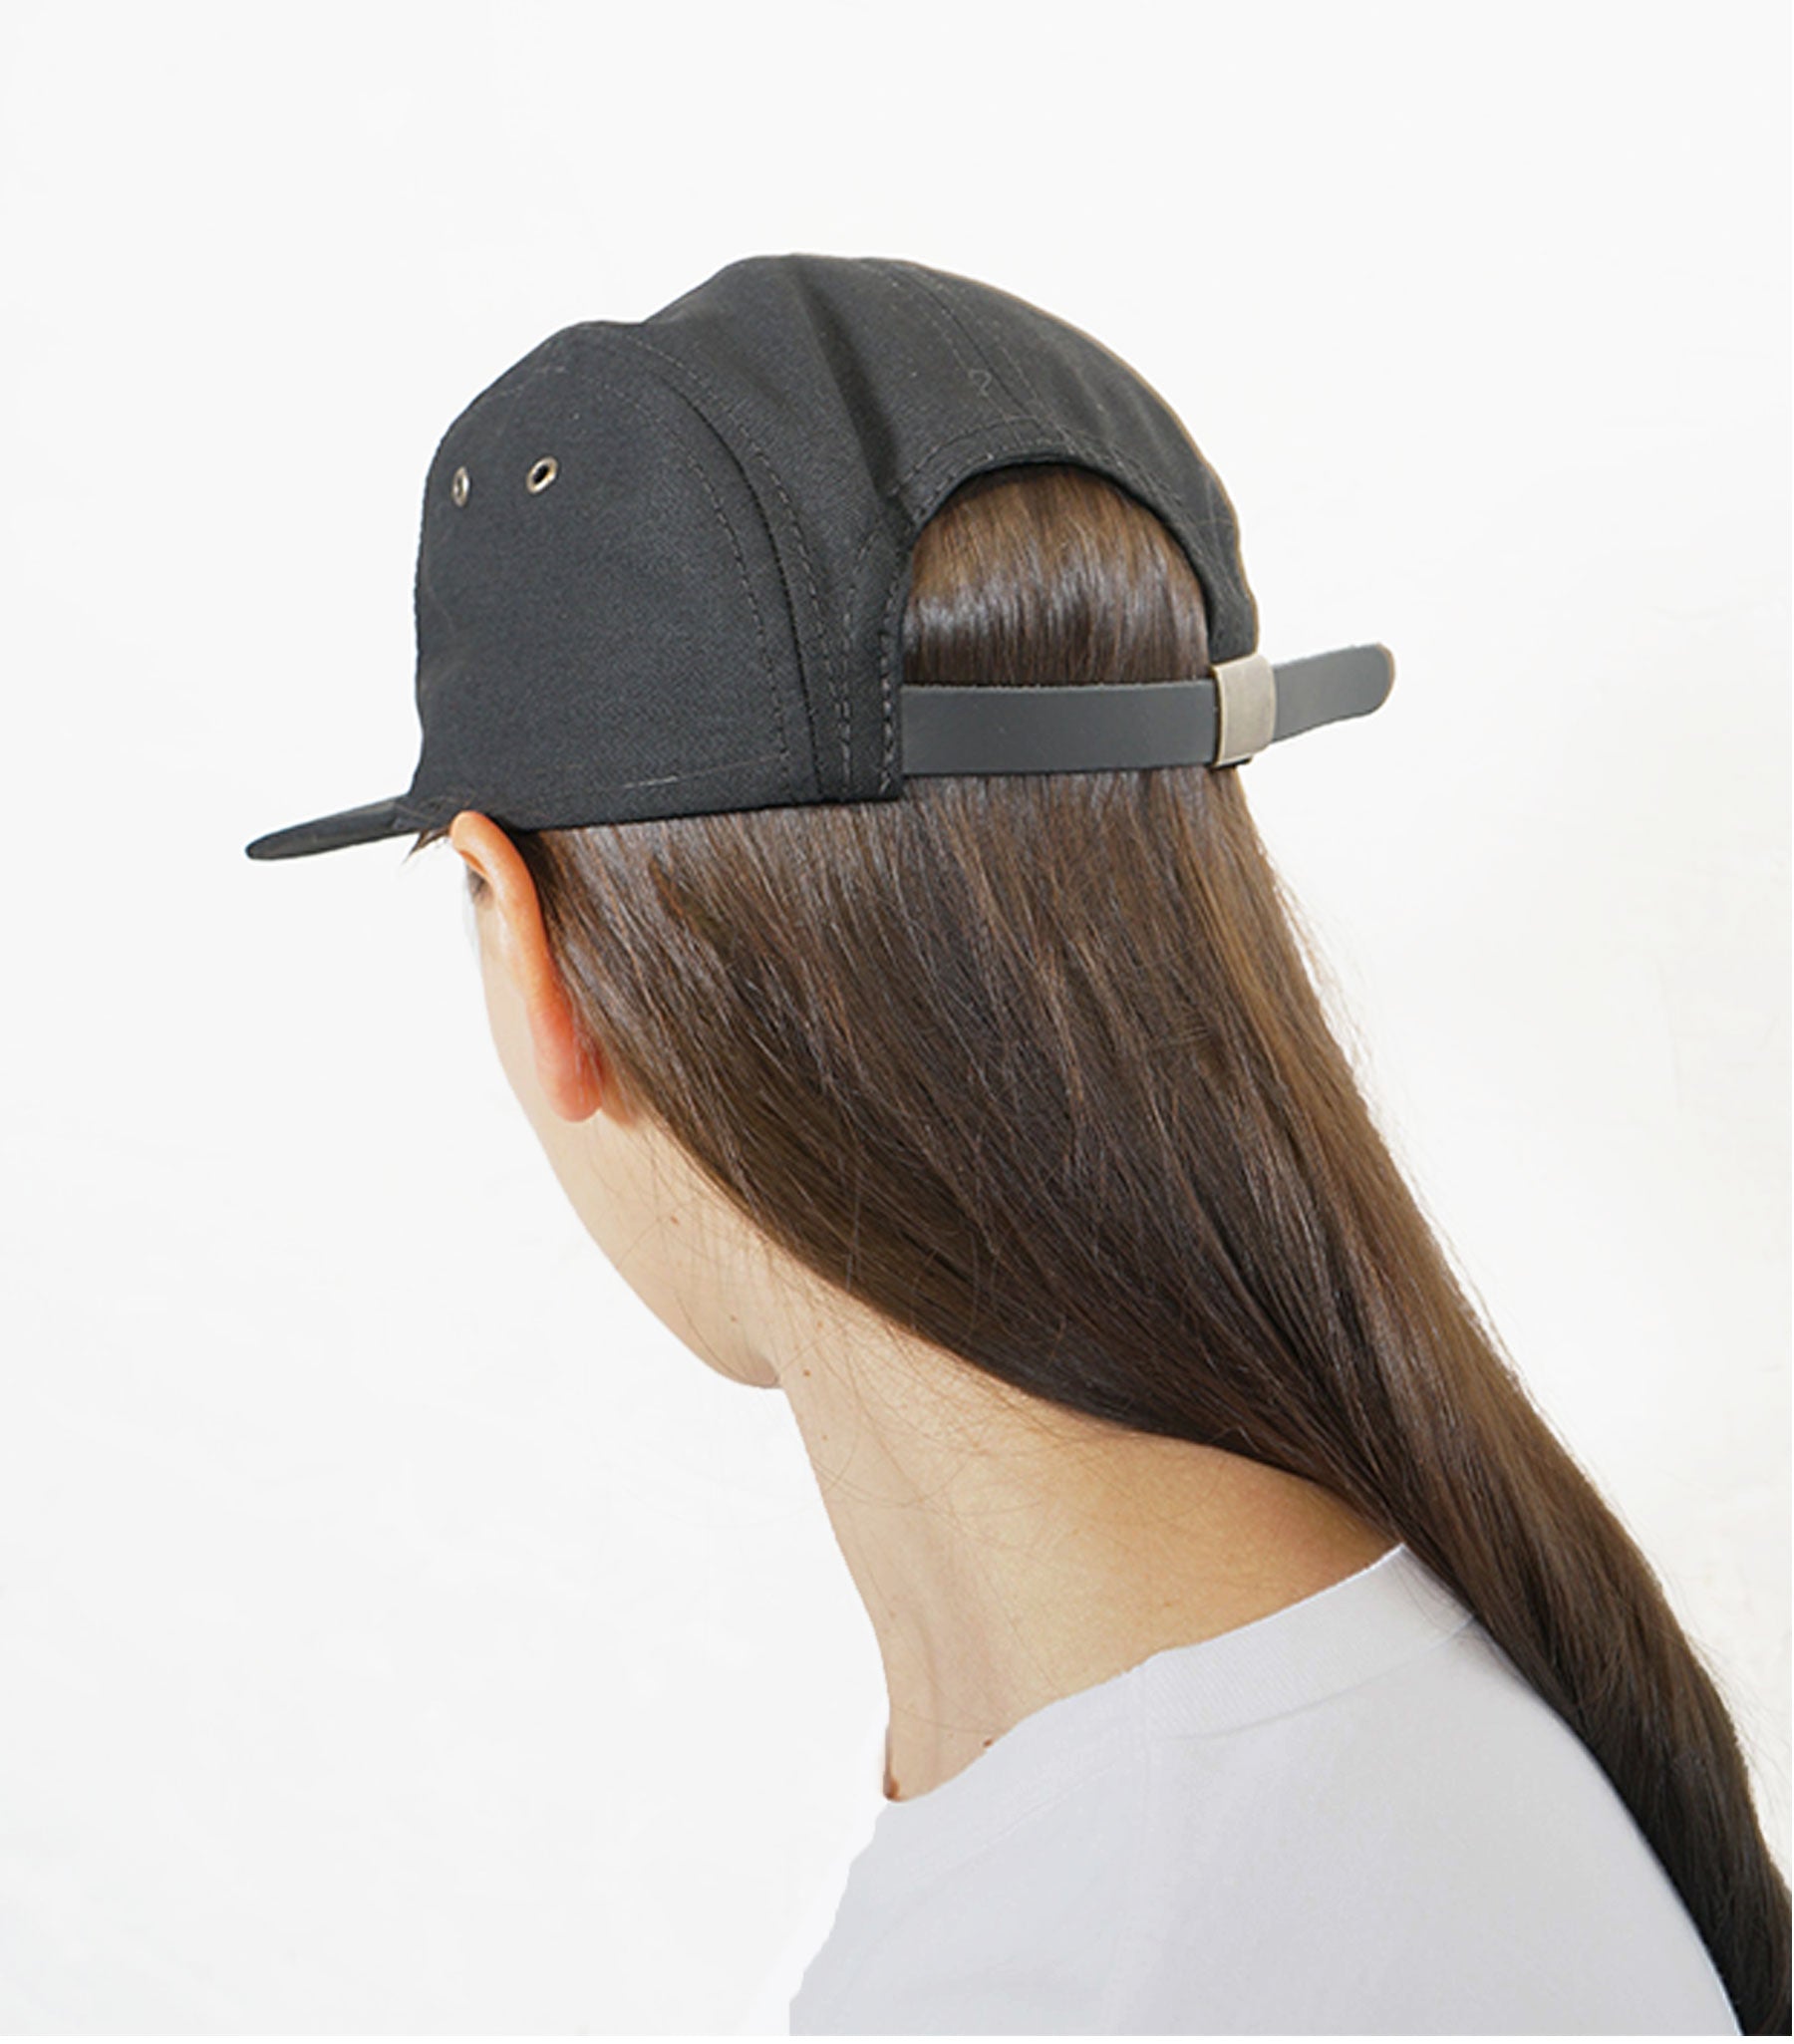 5-Panel Cap Made in USA Black